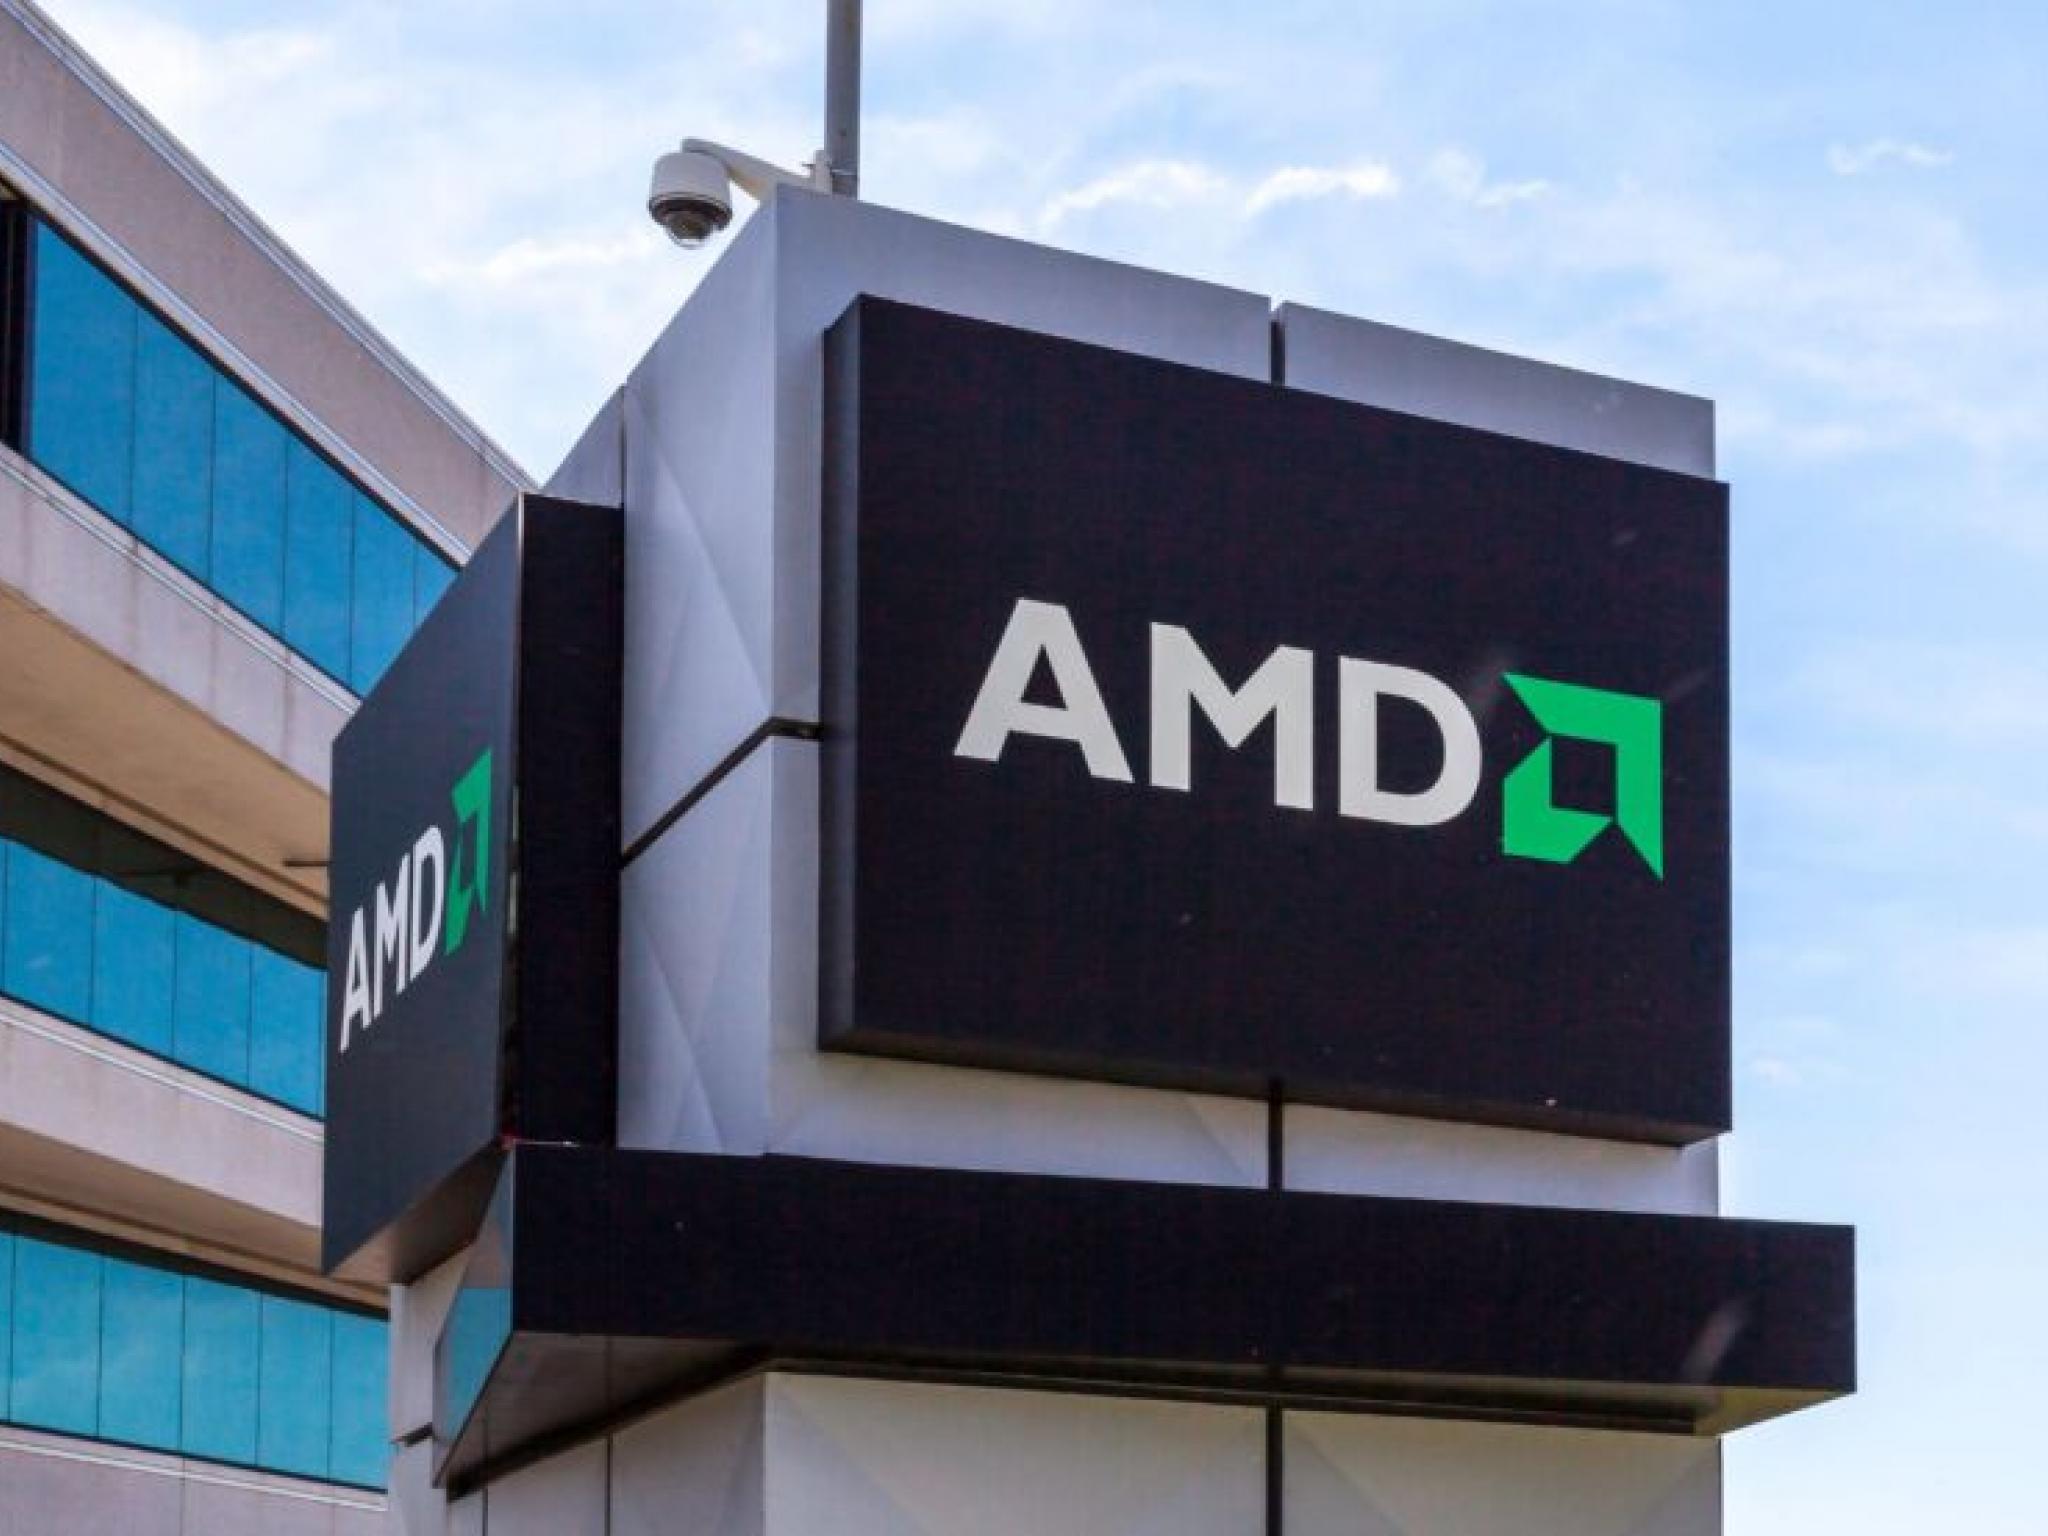  amd-advances-open-source-initiative-with-mes-firmware-release-for-radeon-gpus 